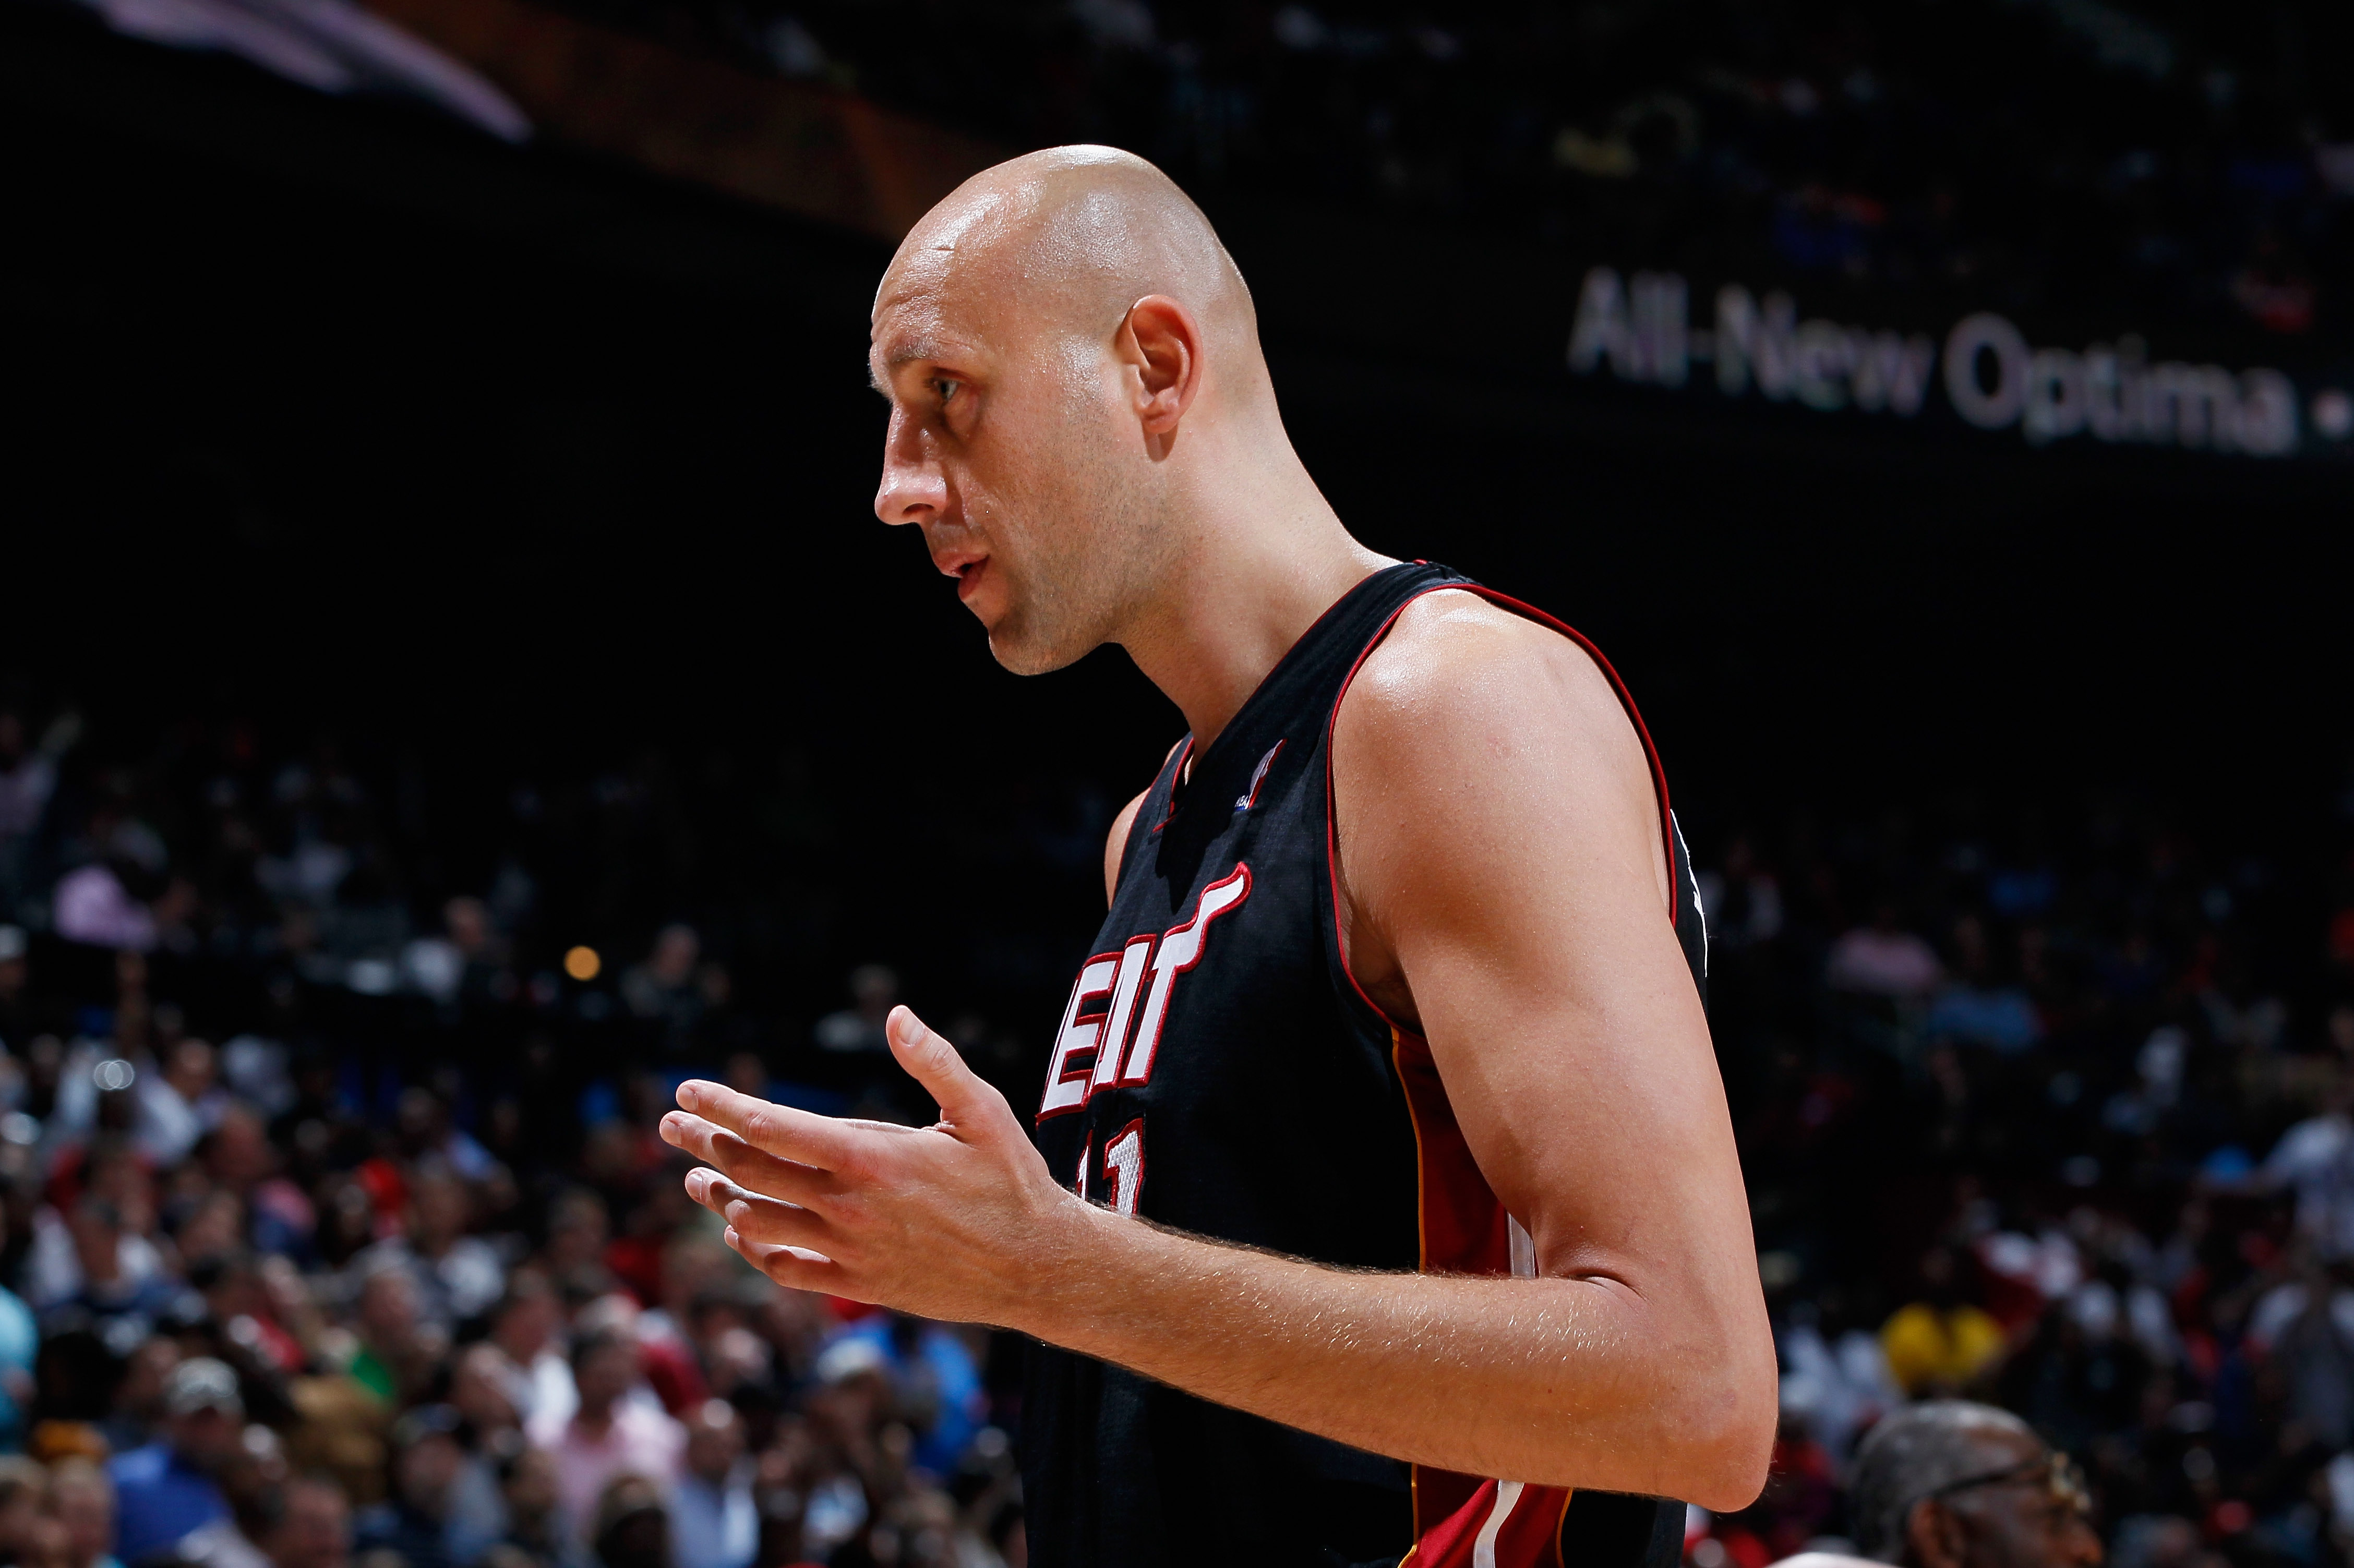 ATLANTA, GA - APRIL 11:  Zydrunas Ilgauskas #11 of the Miami Heat walks off the court after being ejected for a technical foul against the Atlanta Hawks at Philips Arena on April 11, 2011 in Atlanta, Georgia.  NOTE TO USER: User expressly acknowledges and